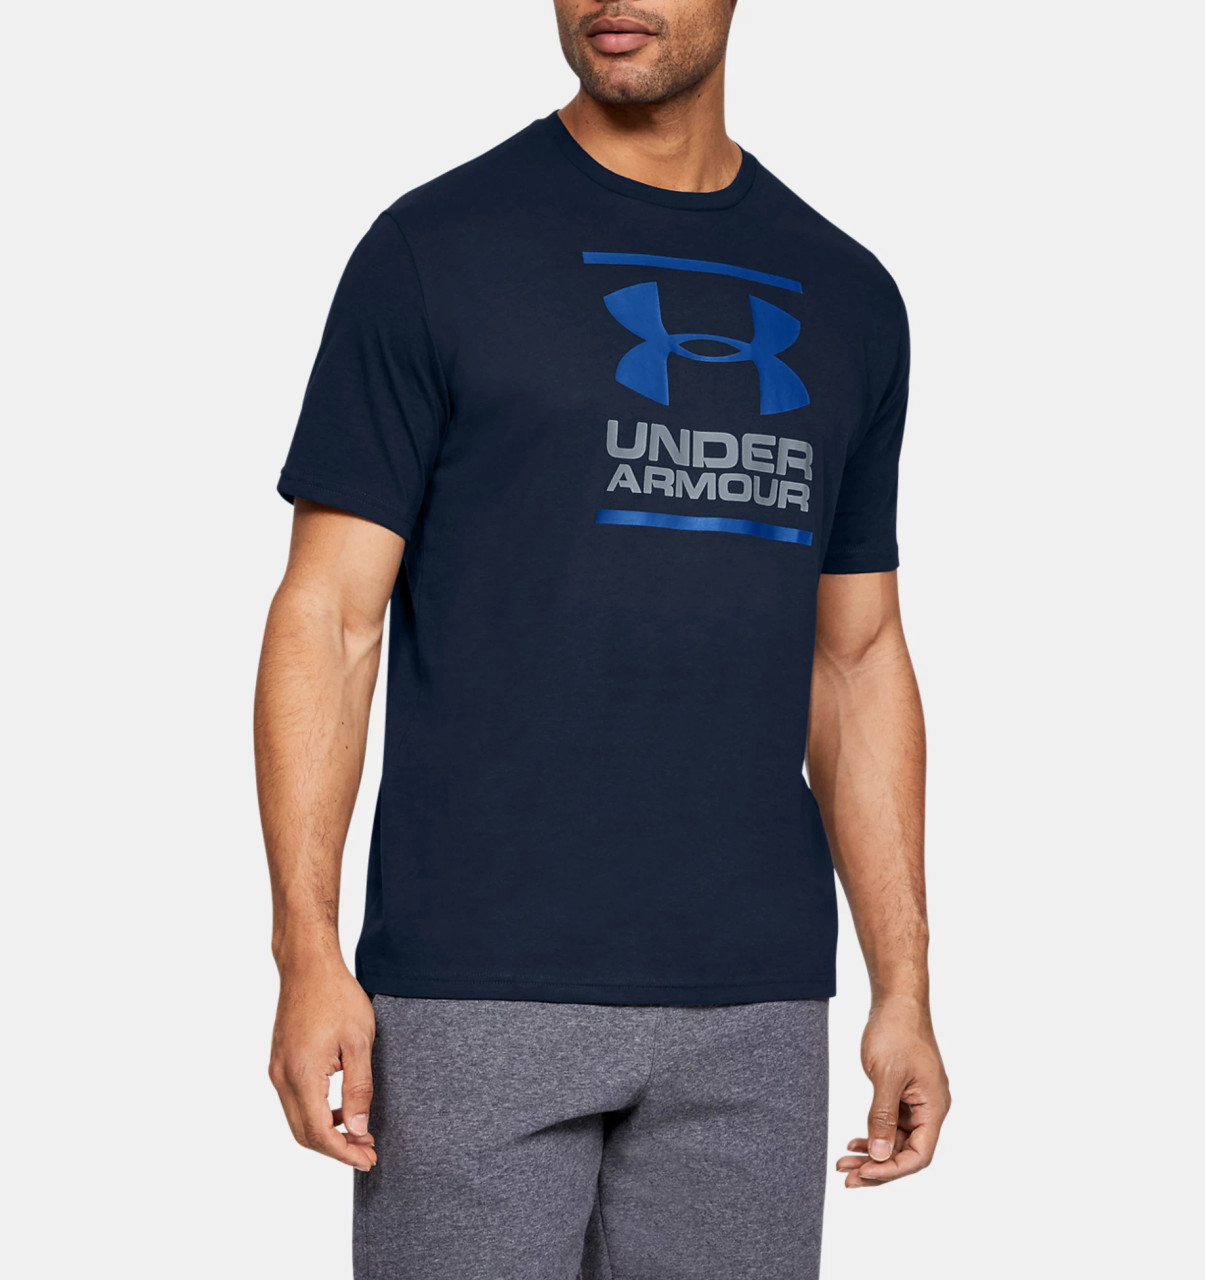 Under Armour Men's UA GL Foundation Short Sleeve T-Shirt Tee - 1326849-408  - Knockout Wear, Lifestyle Clothing, Shoes and Accessories